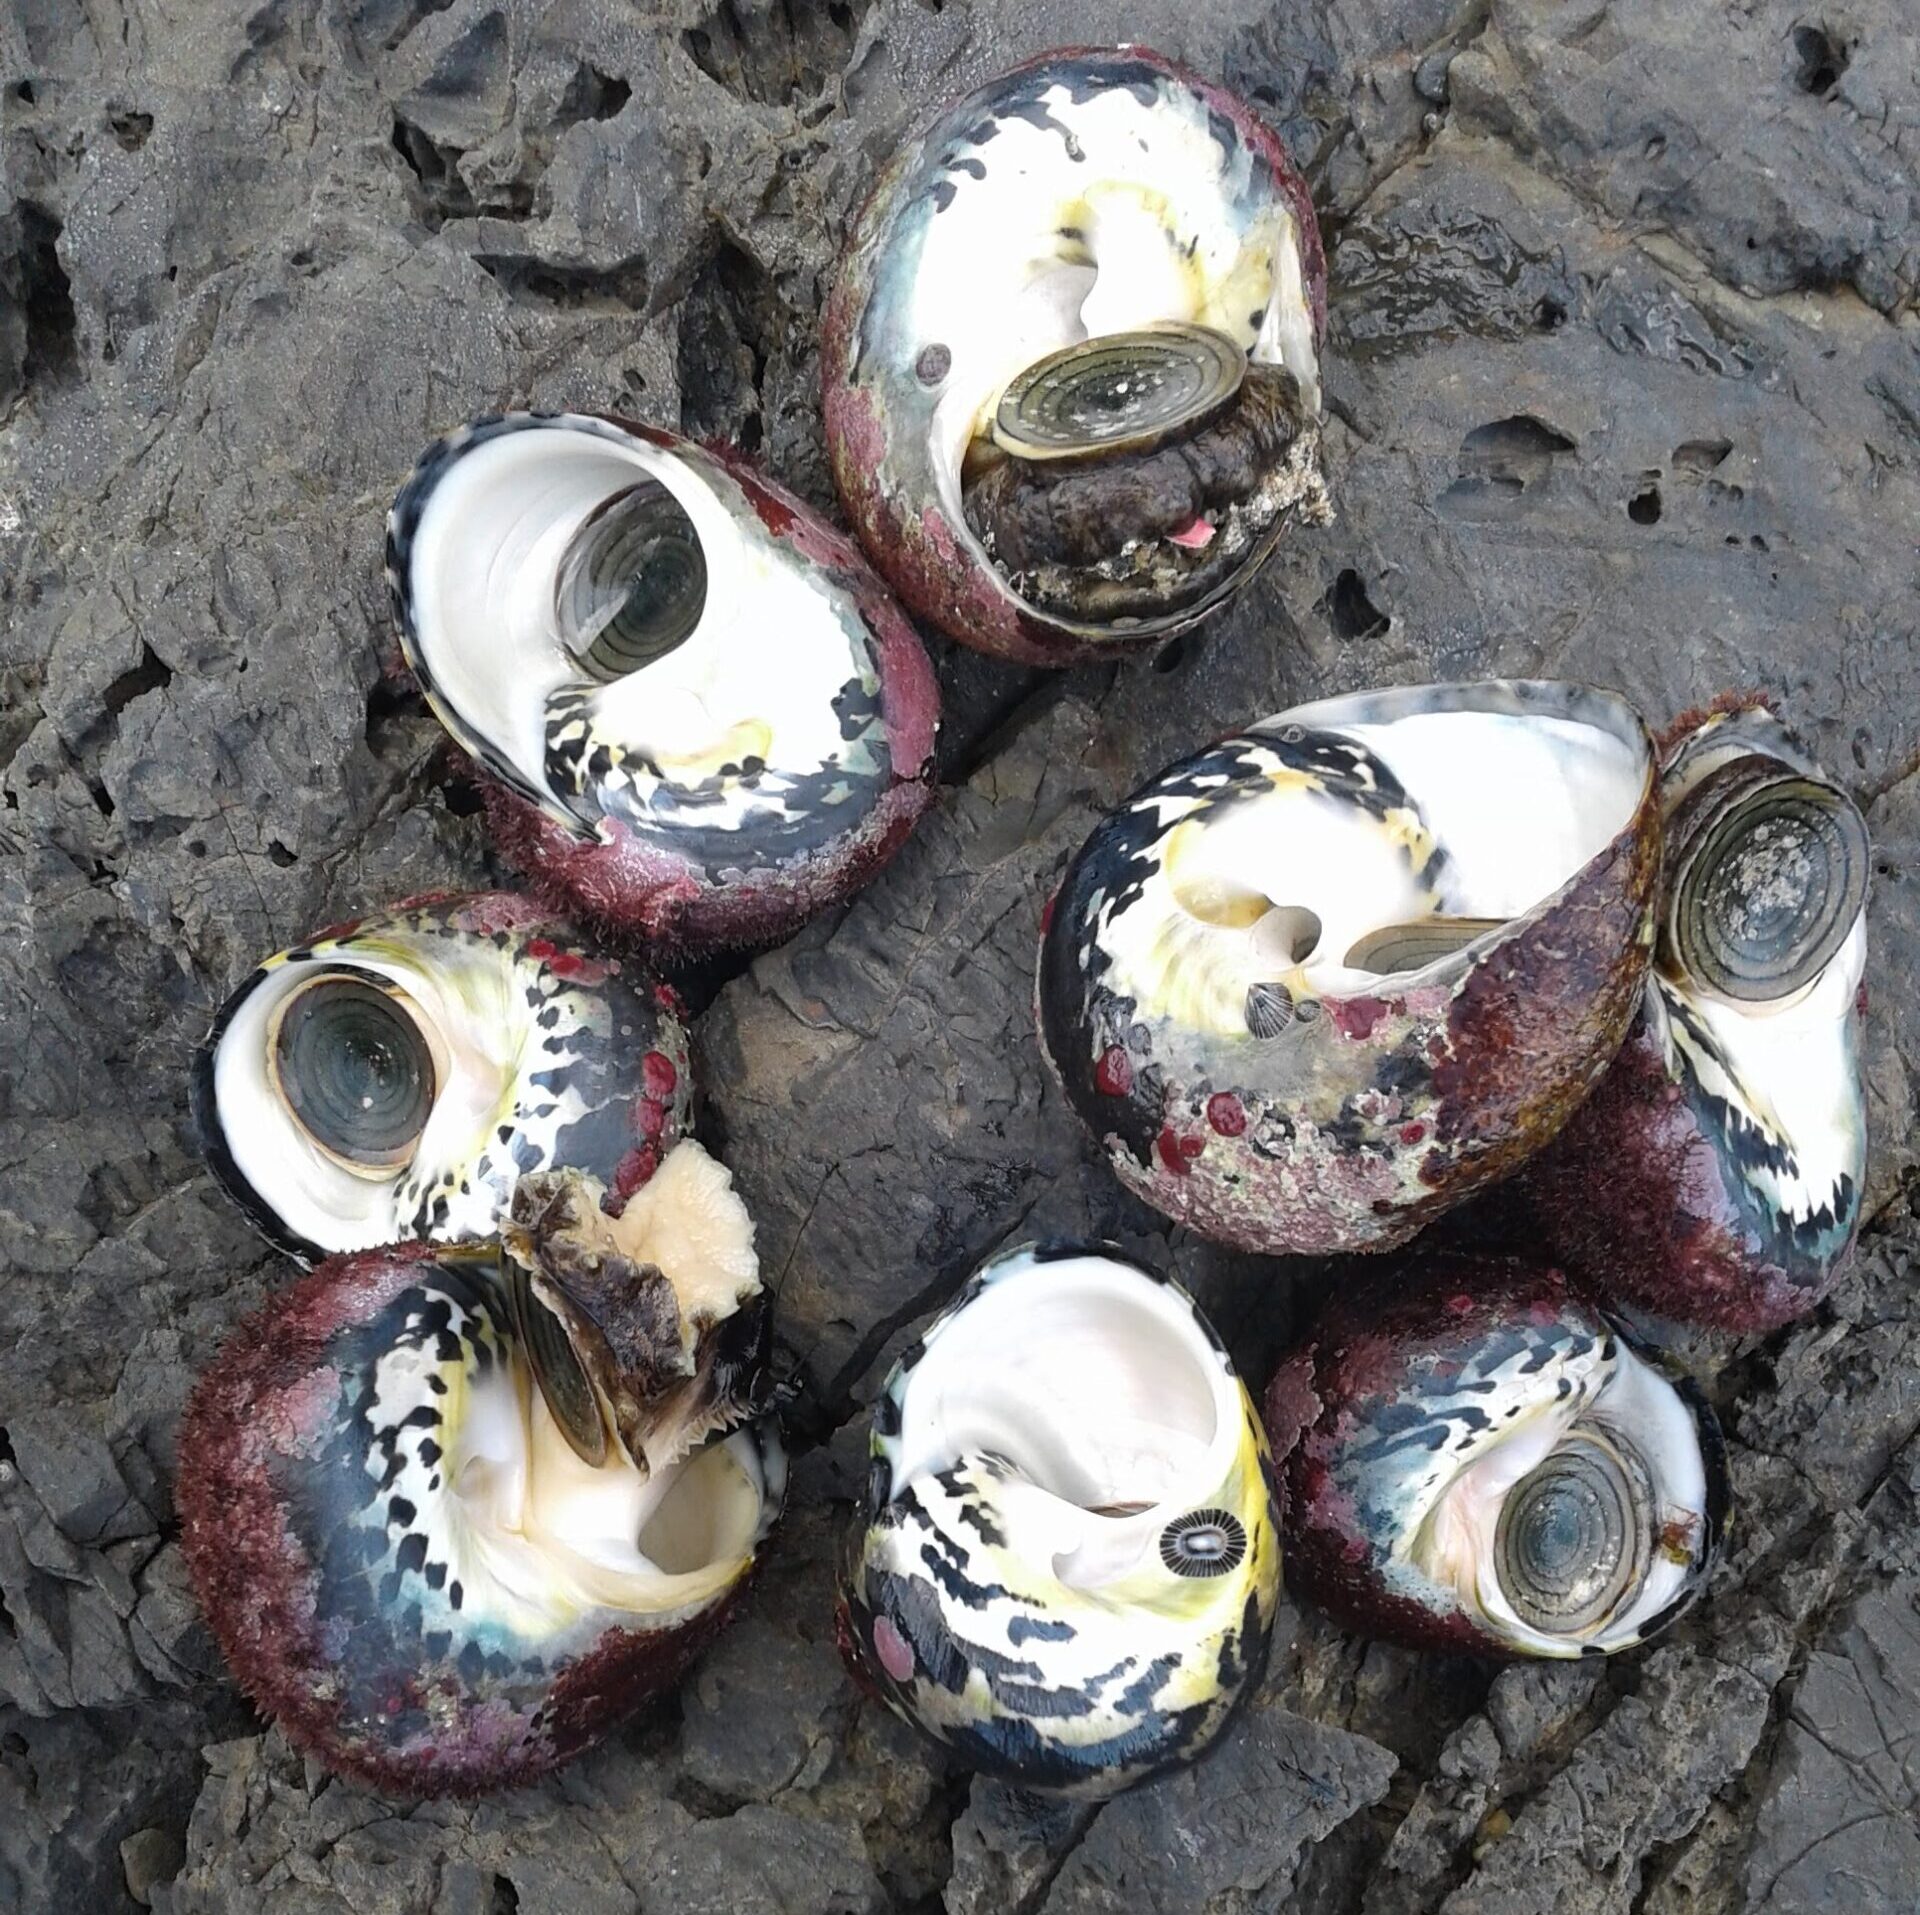 Whelks thrive at Annaly Bay on St. Croix. (Photo by Olasee Davis)